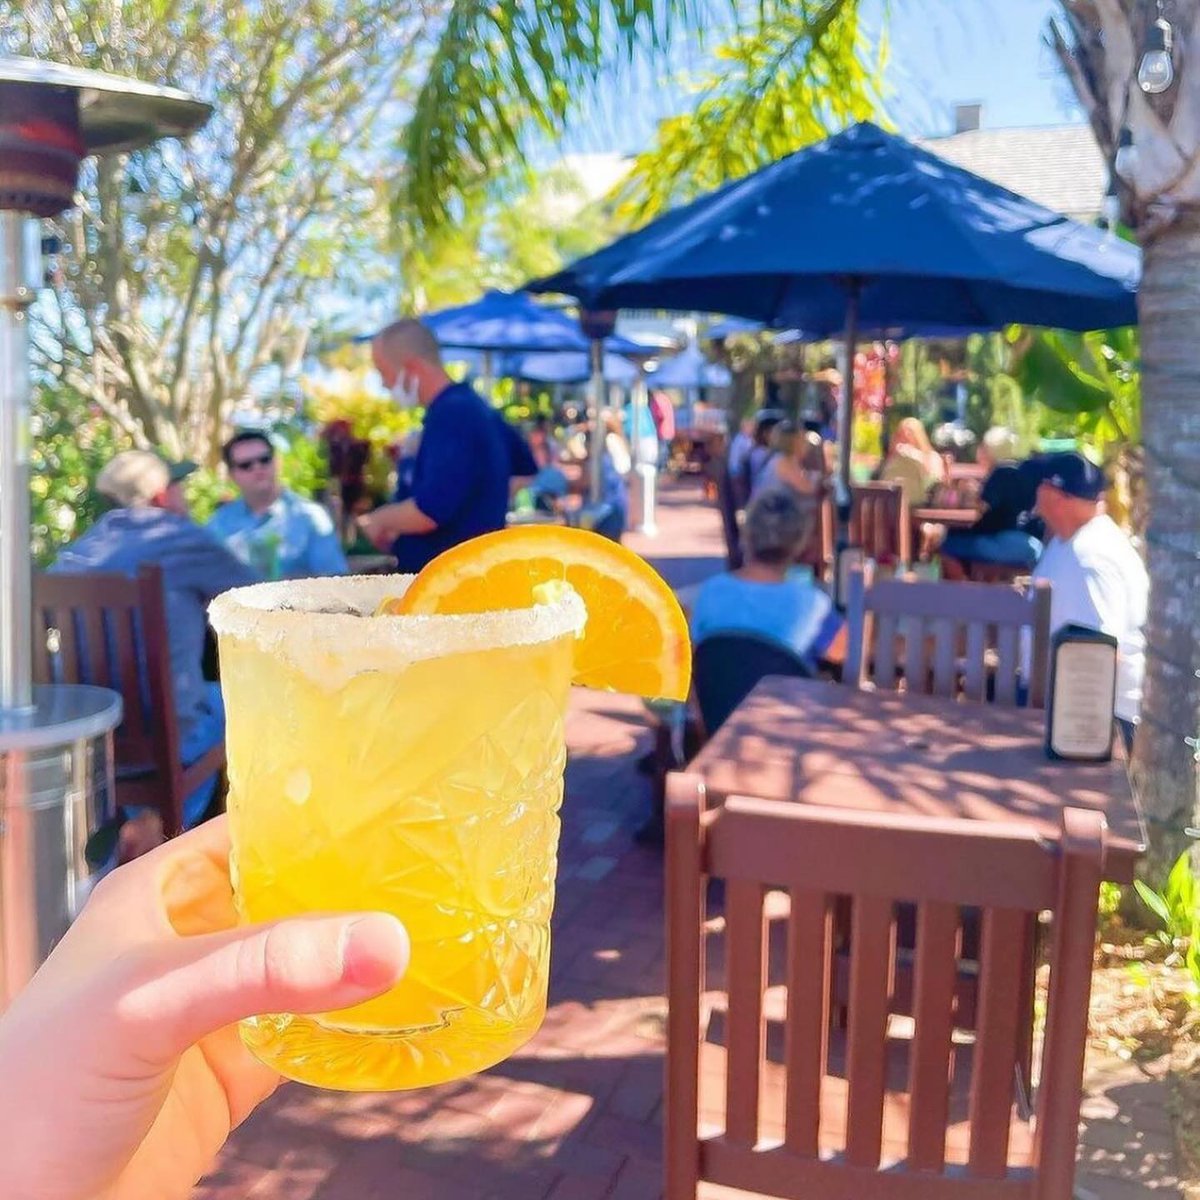 Florida's Historic Coast is the place to eat, drink & be merry! We all know vacation calories don't count! 😉 📷:@ocwhites #FloridasHistoricCoast #PonteVedraBeach #StAugustine bit.ly/2LFPnSq